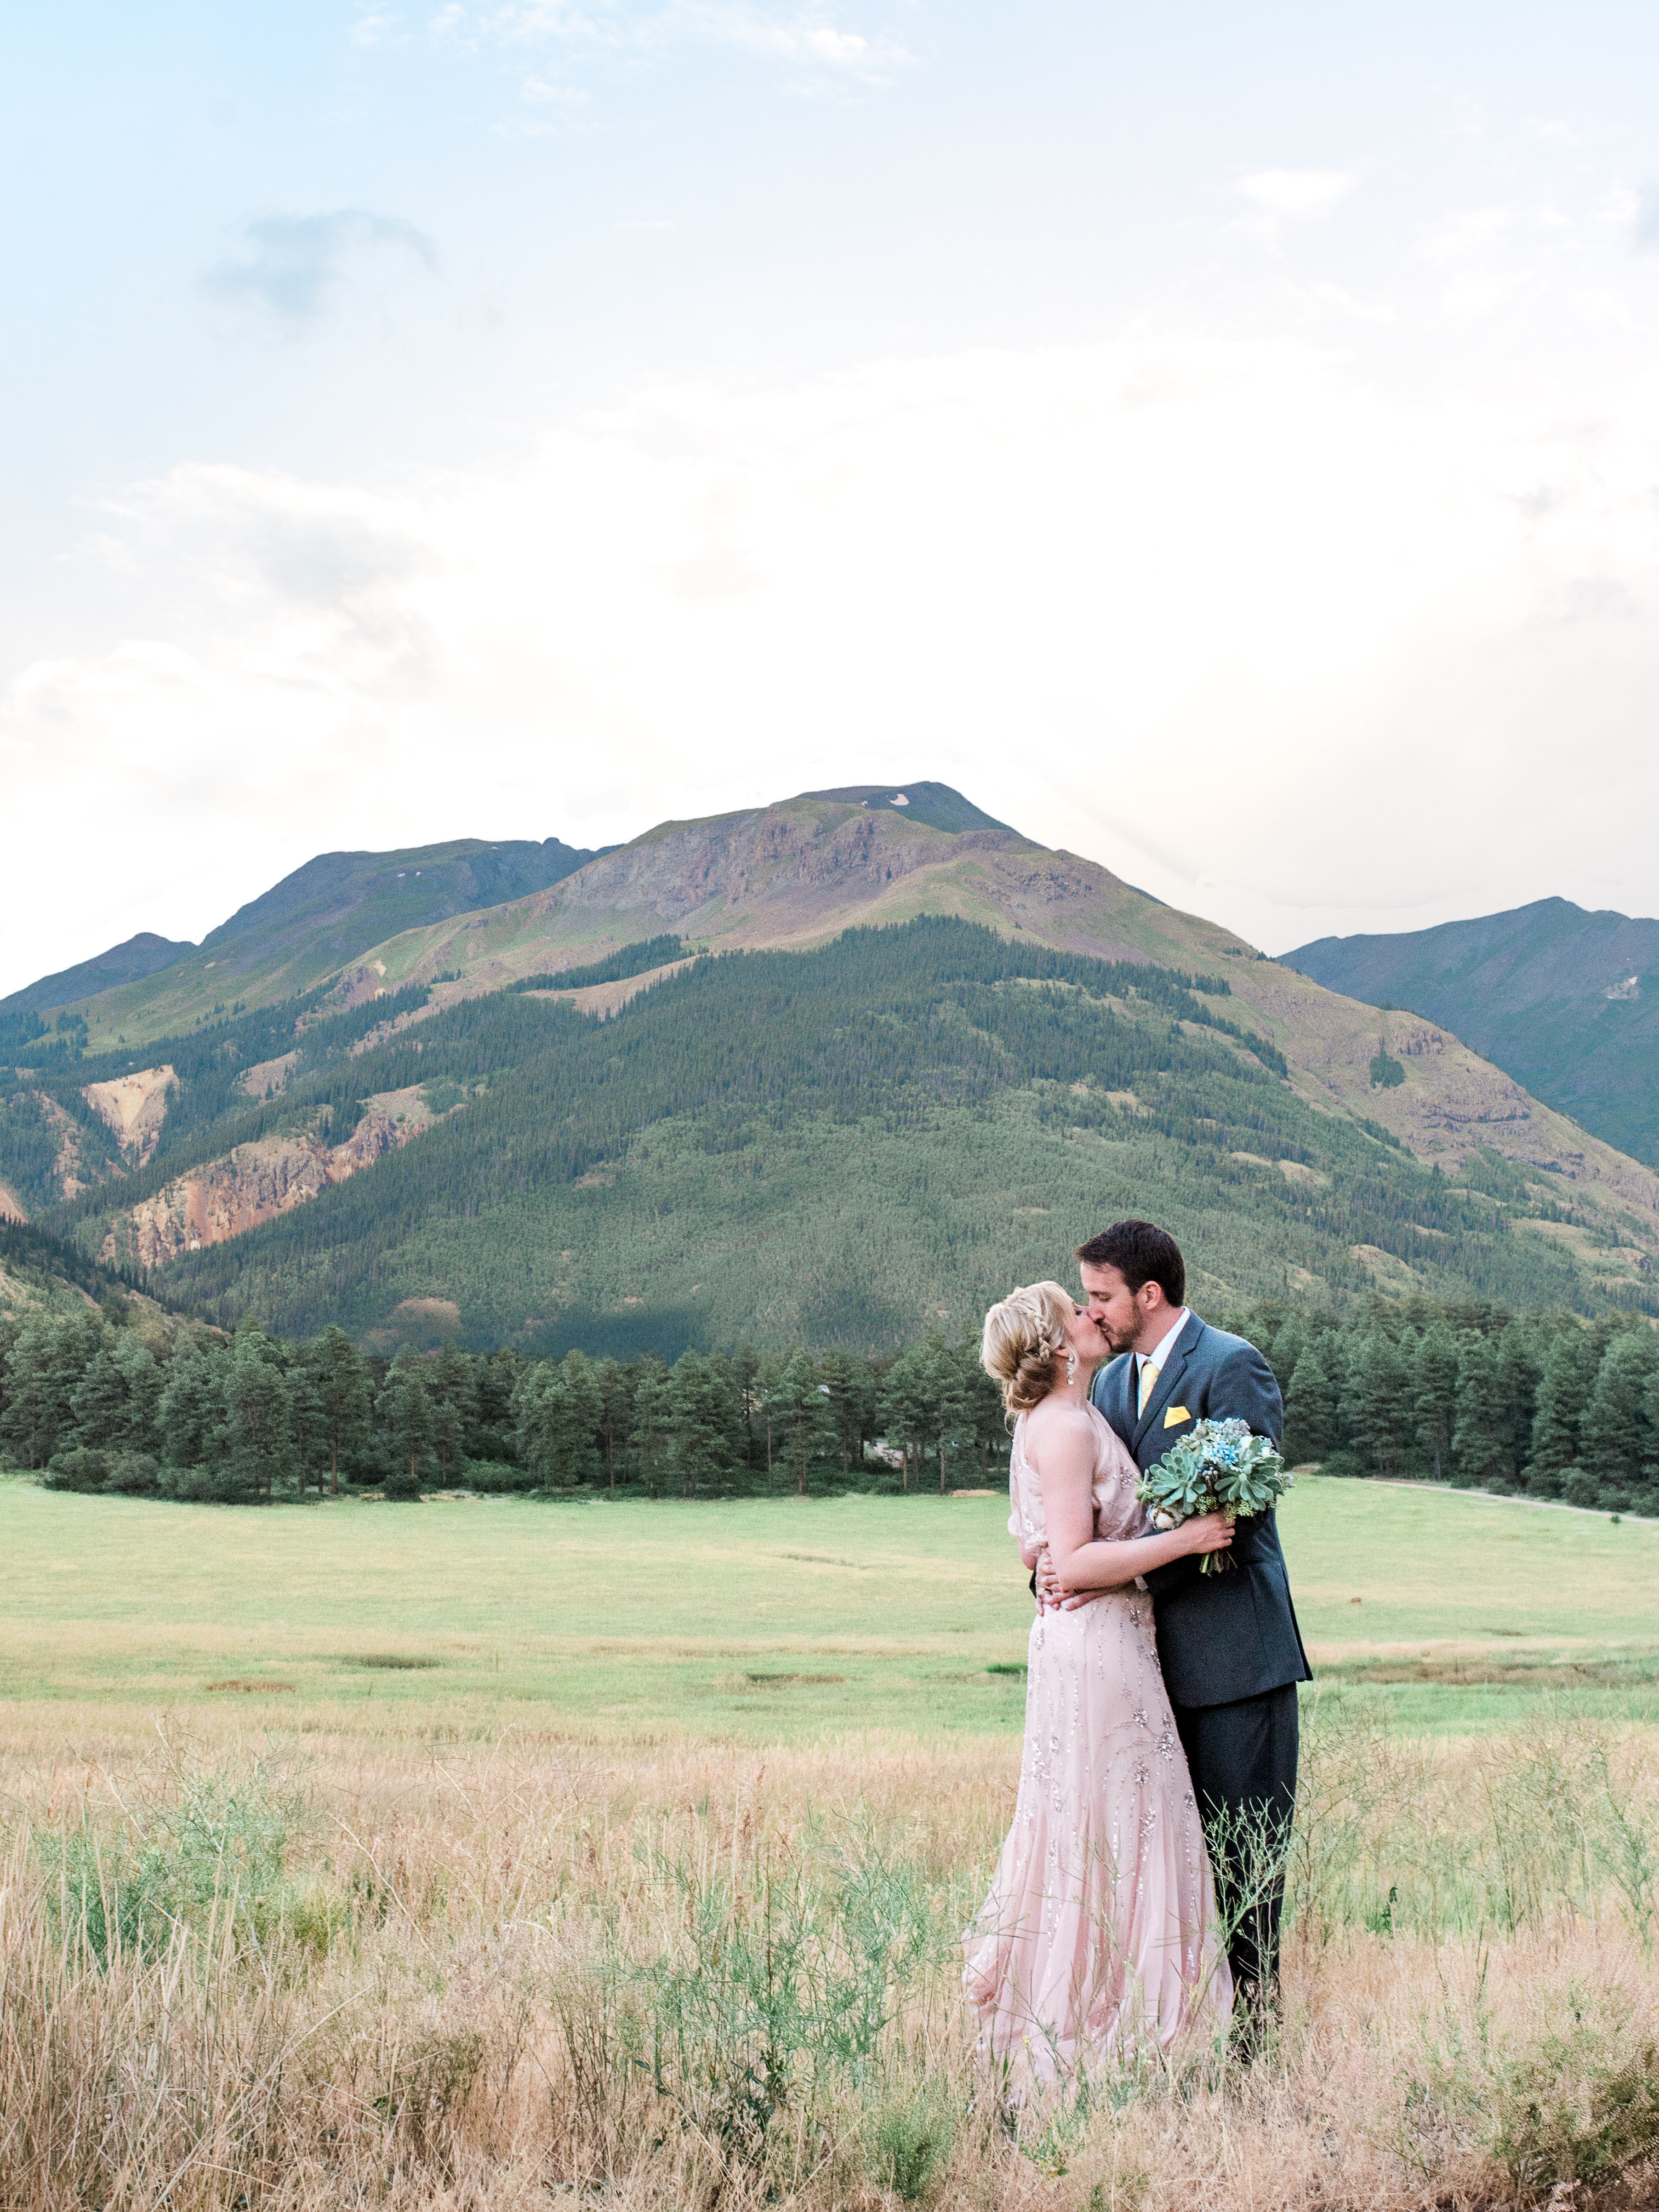 Colorado Destination Wedding couple standing in a field at the base of a mountain embracing and kissing by Wedding Photographer in Houston Thomas Ross Photography